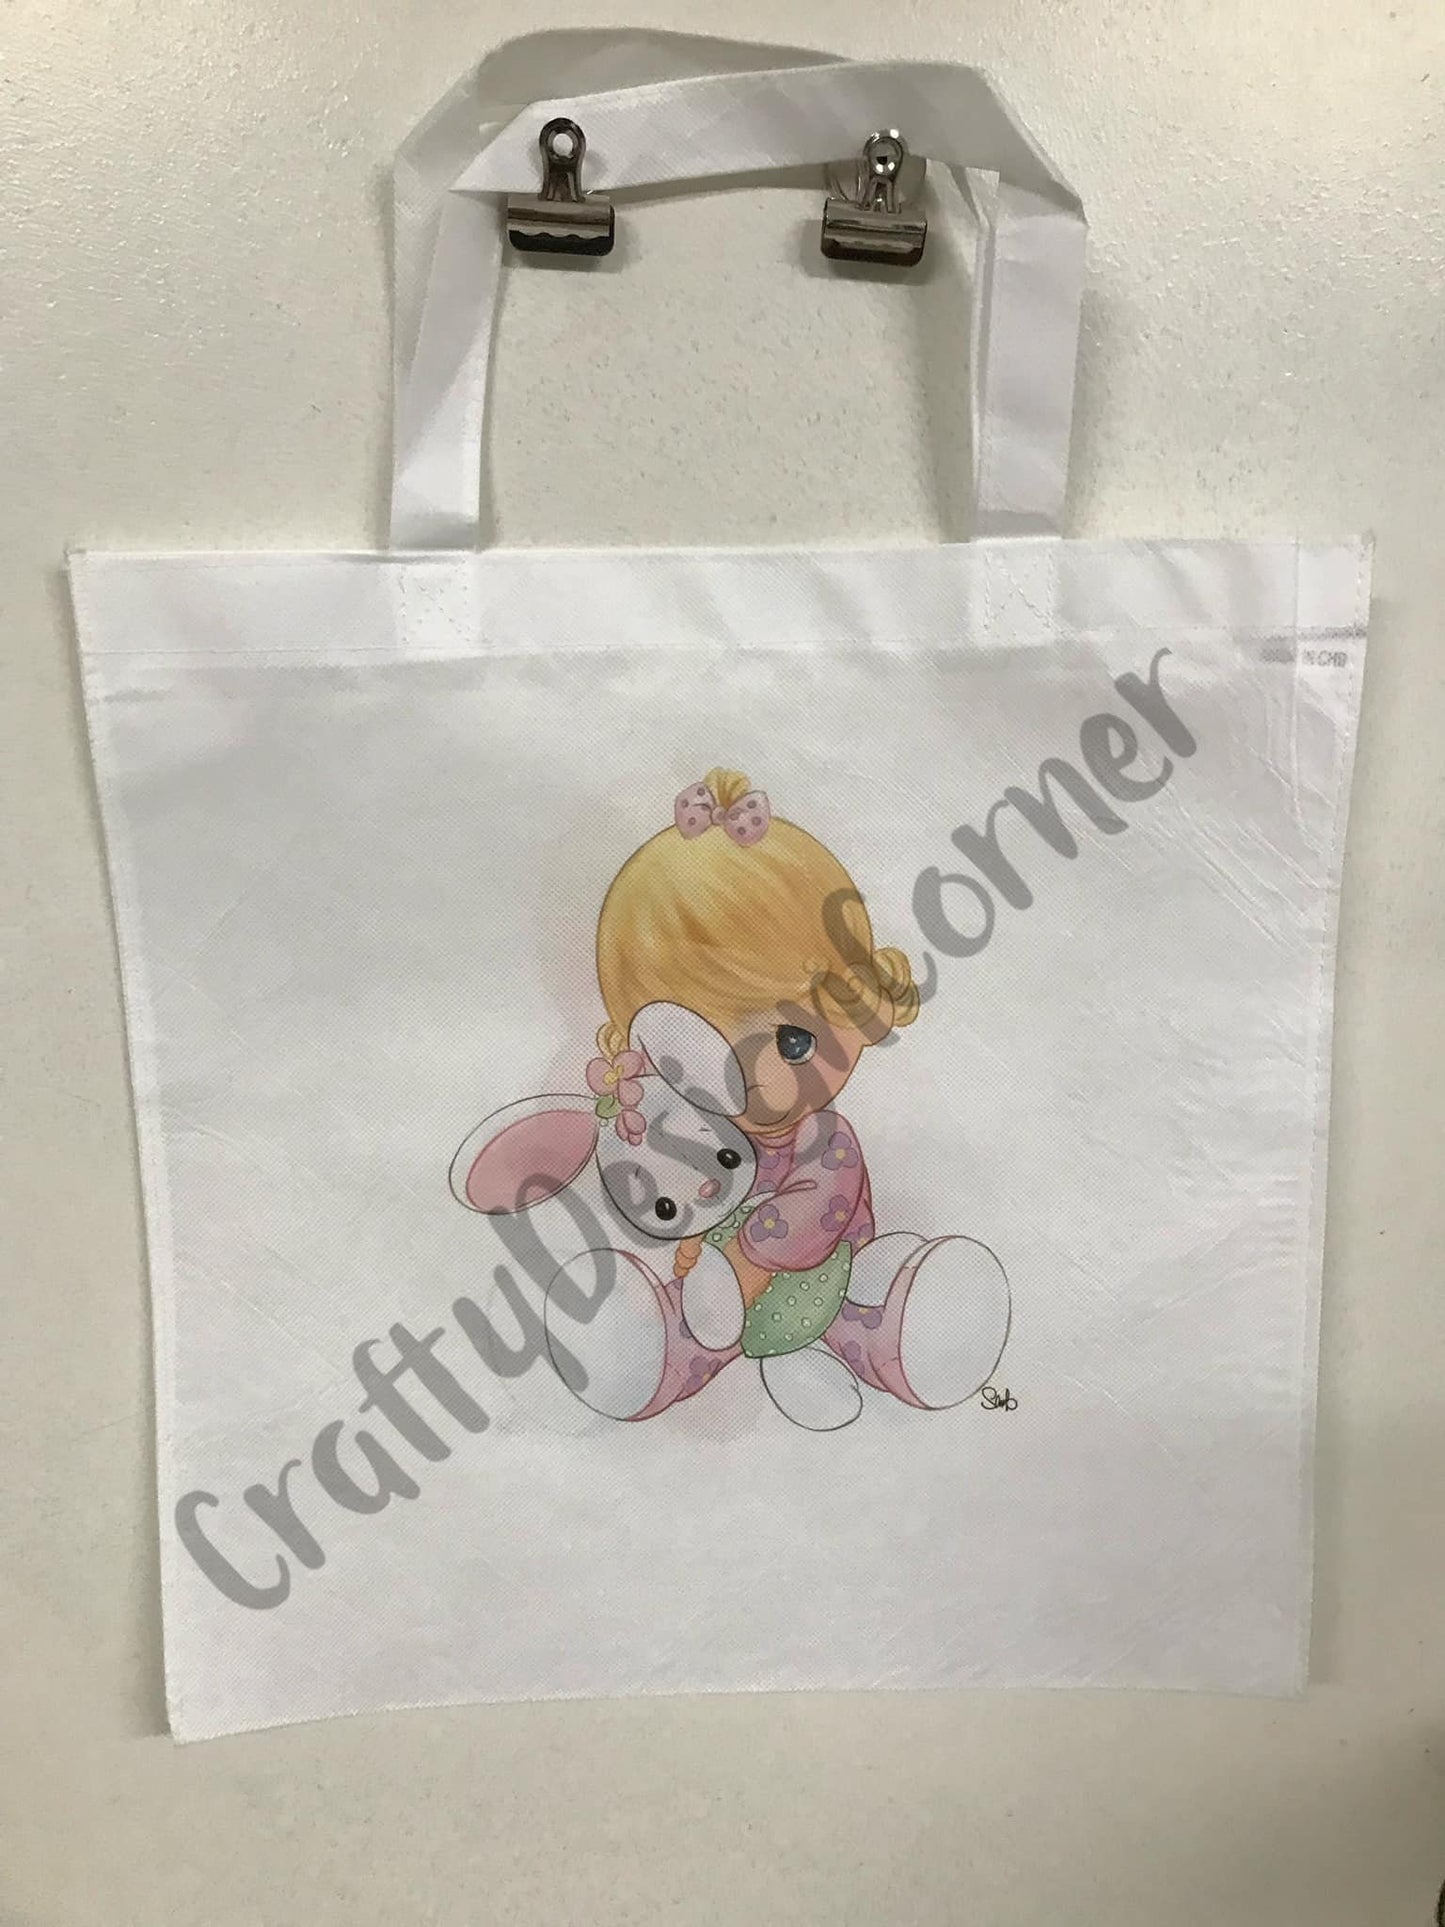 Double sided RTS OOPSIE Bag, Little Boy with bear Designed Tote Bag Eco Friendly